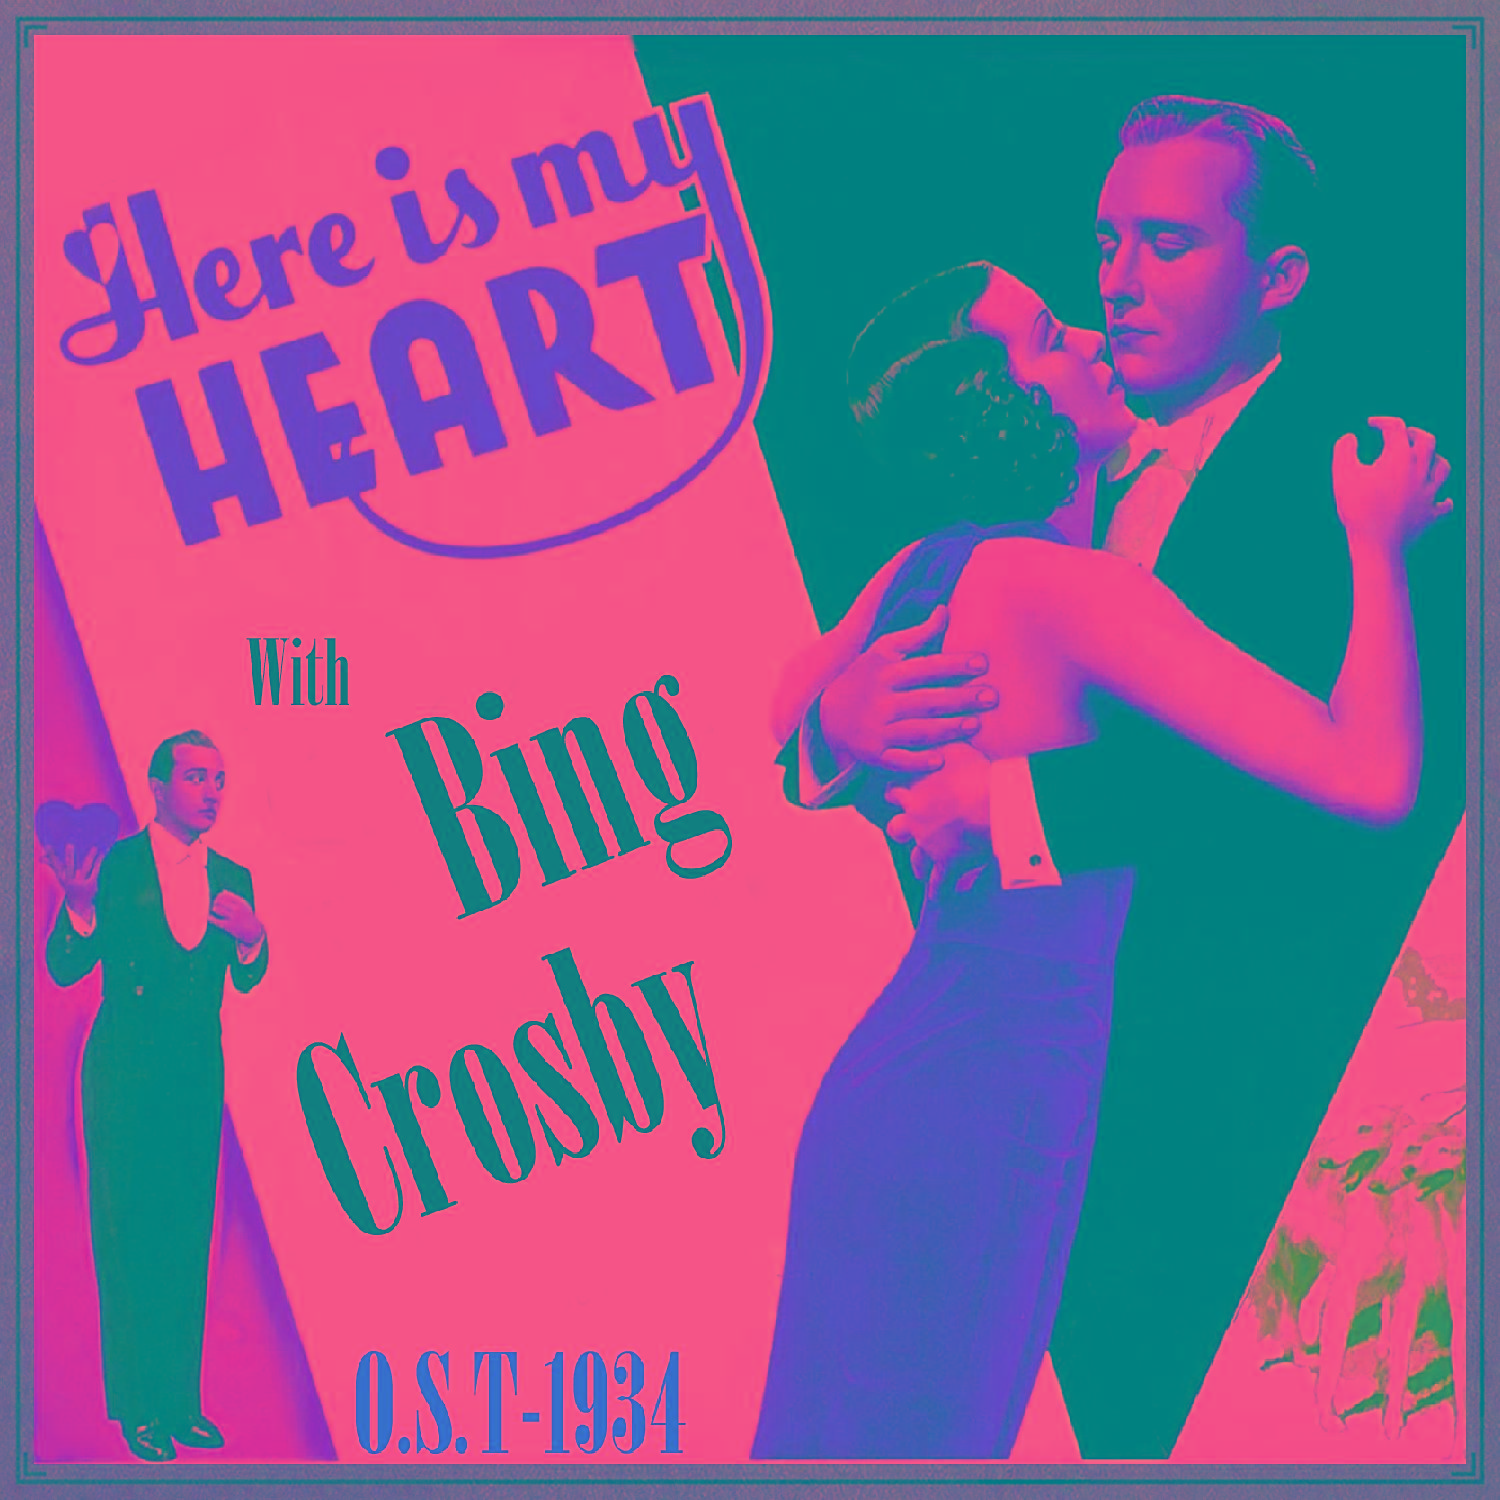 Here Is My Heart (O.S.T - 1934)